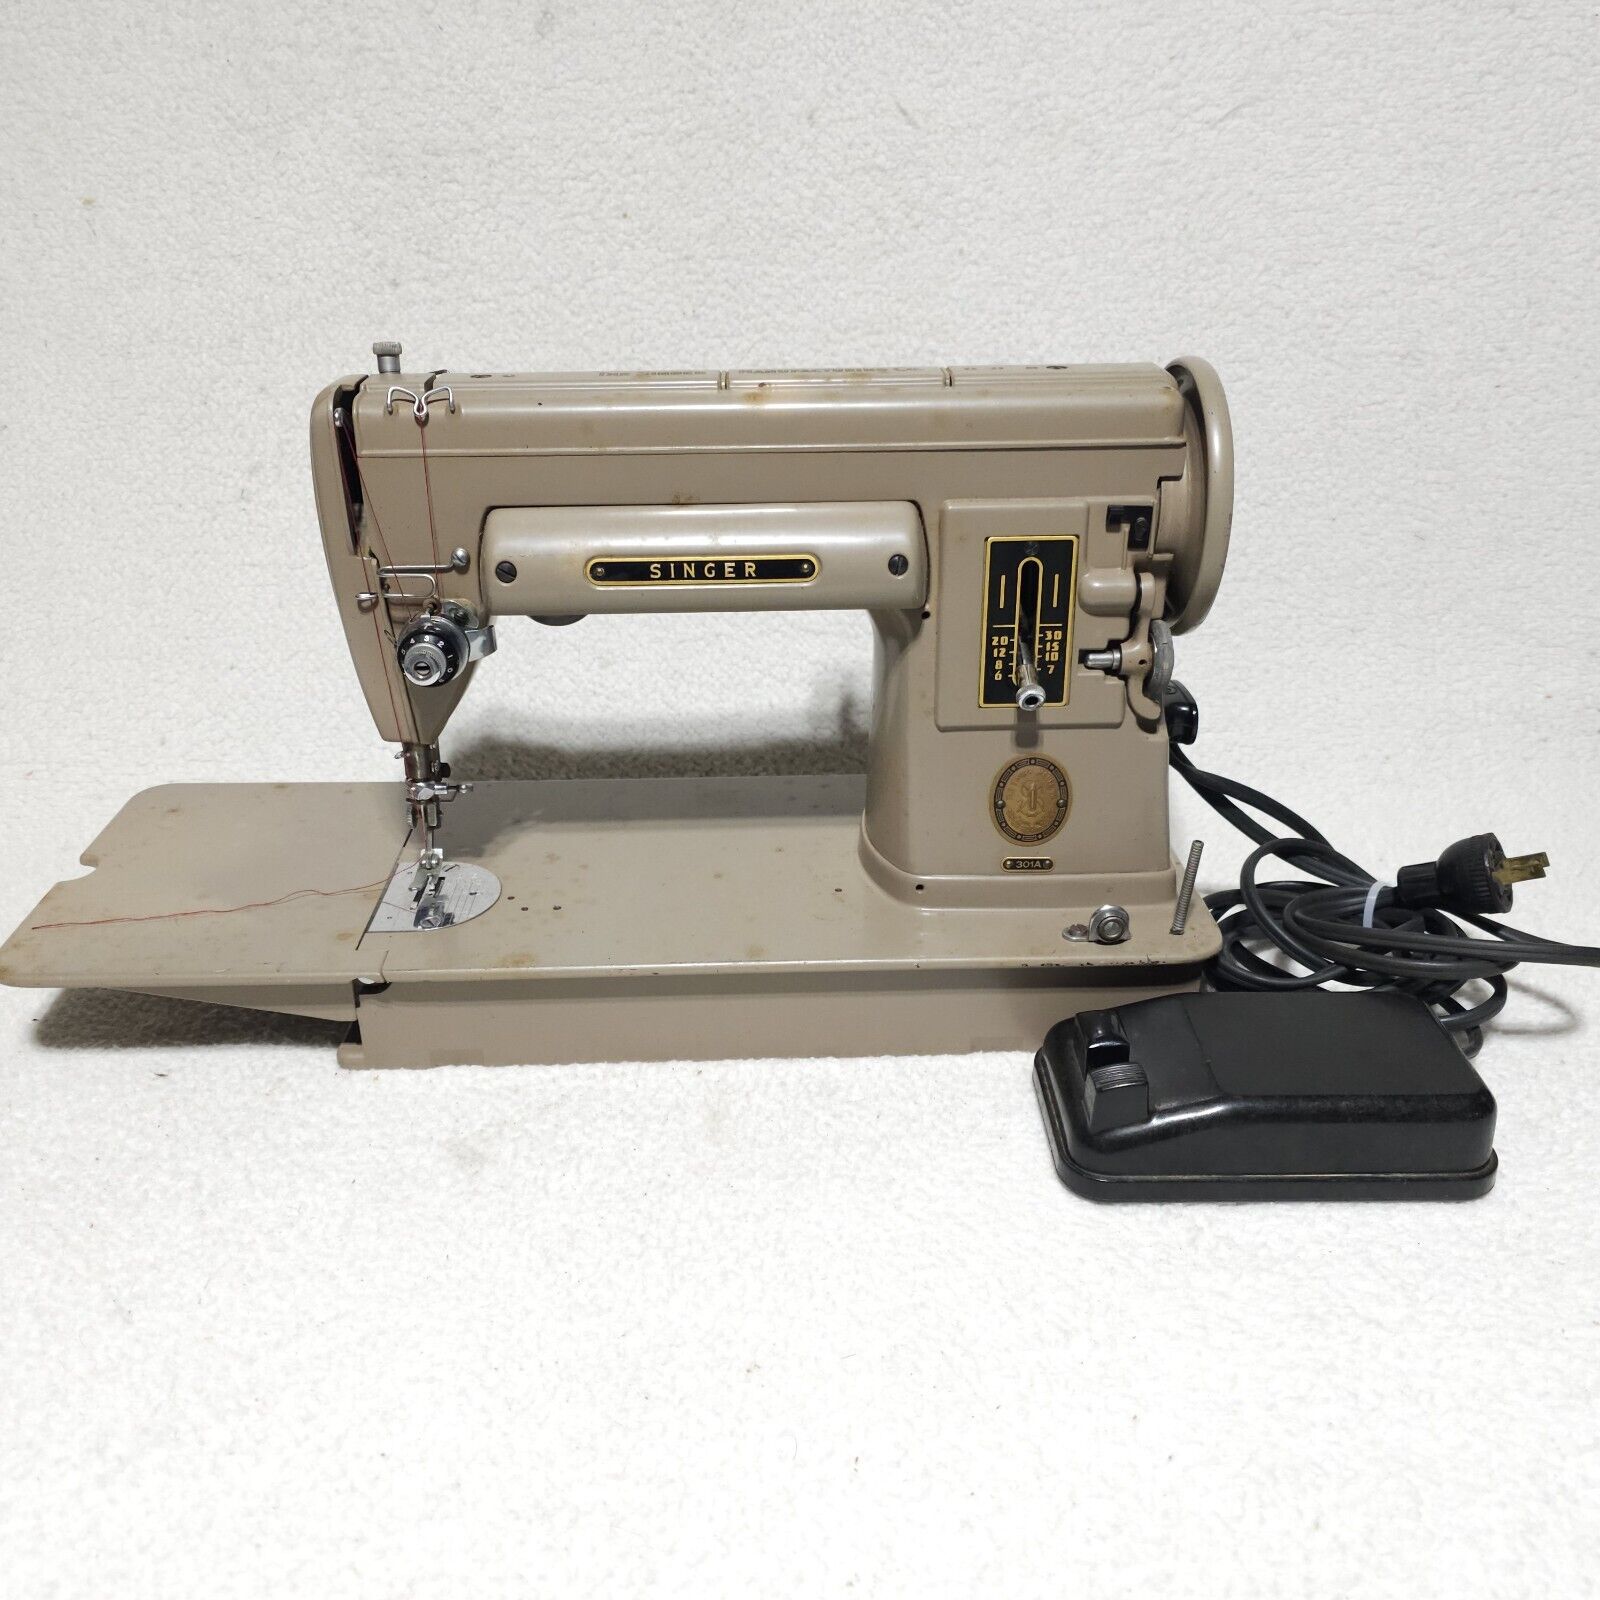 Vintage 1954 Singer 301A Heavy Duty Sewing Machine. Tested